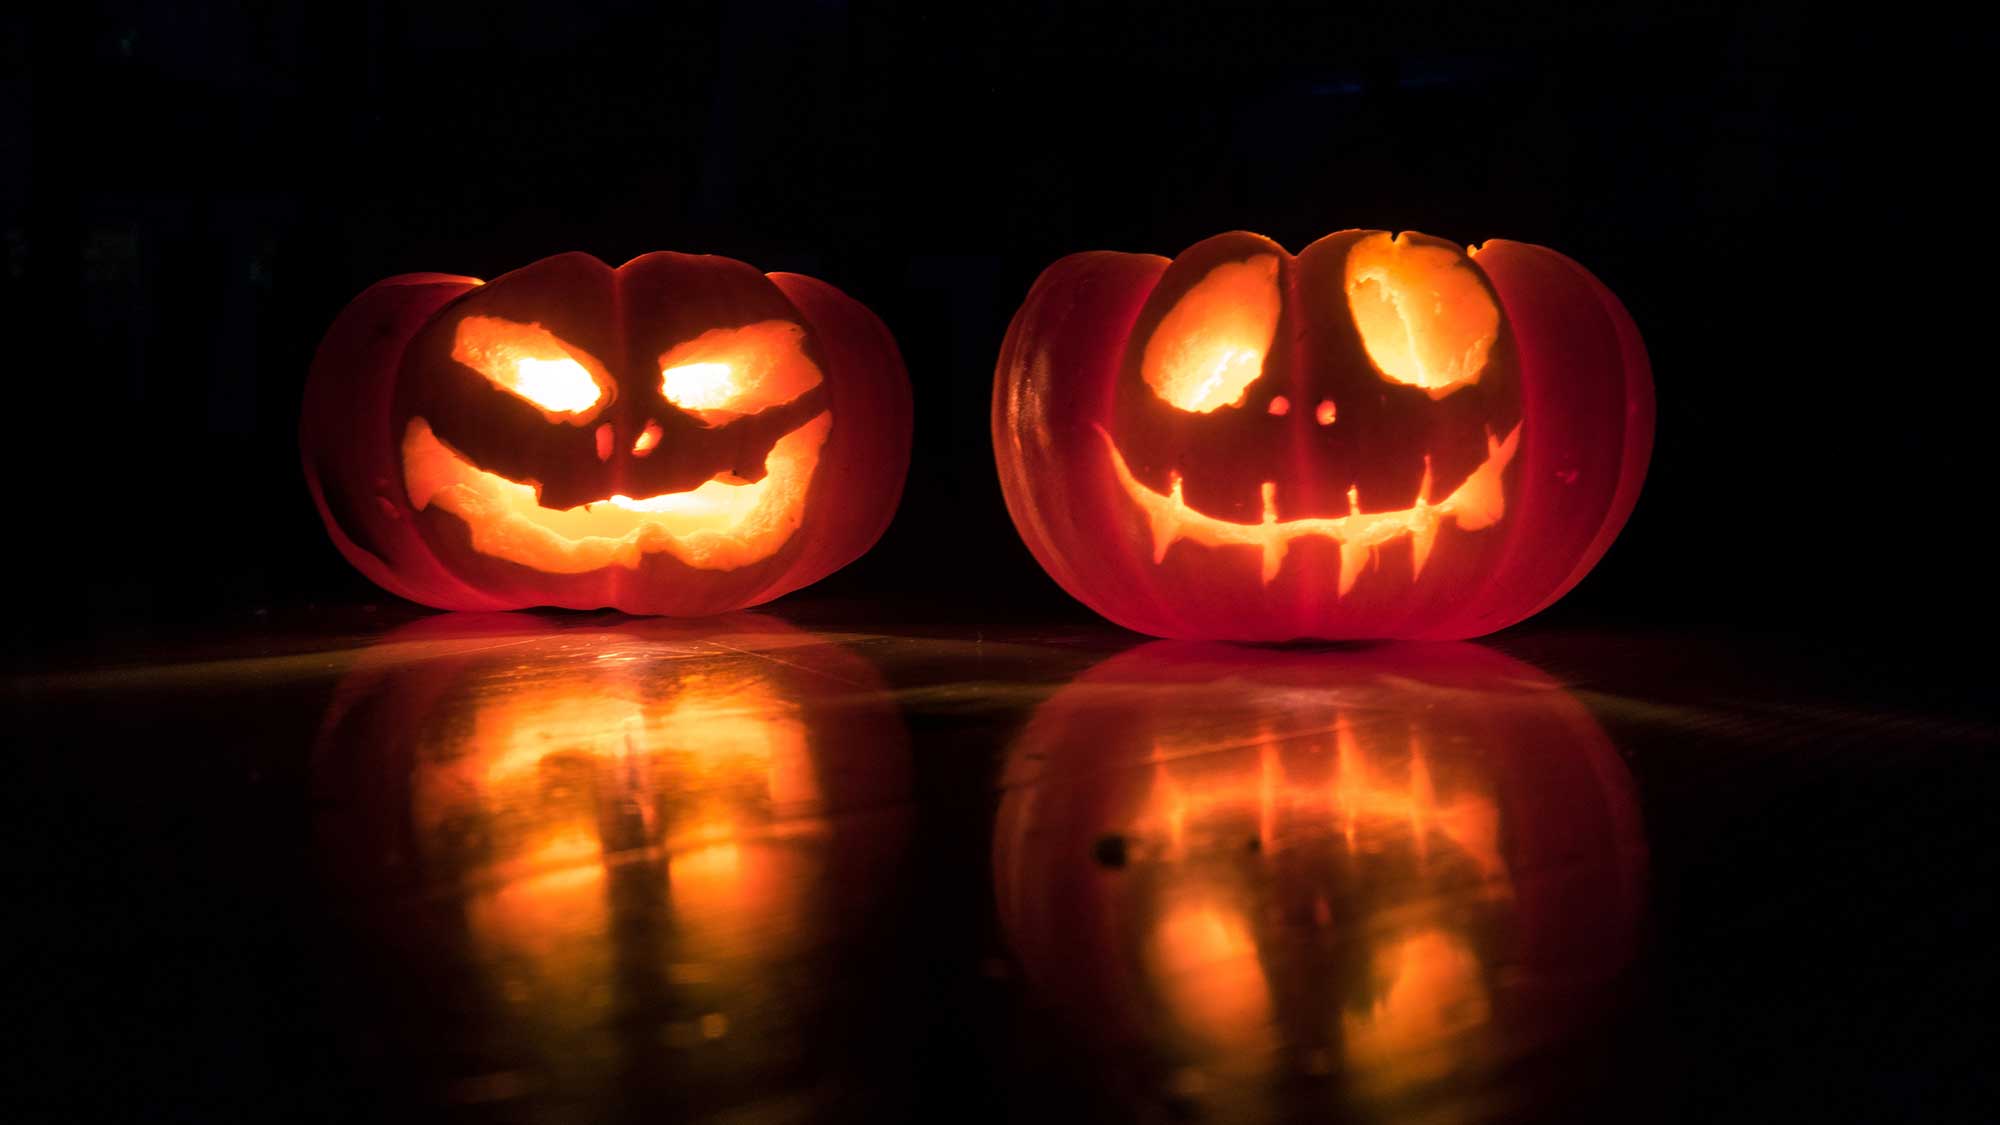 Two carved pumpkins are lit up in the dark.